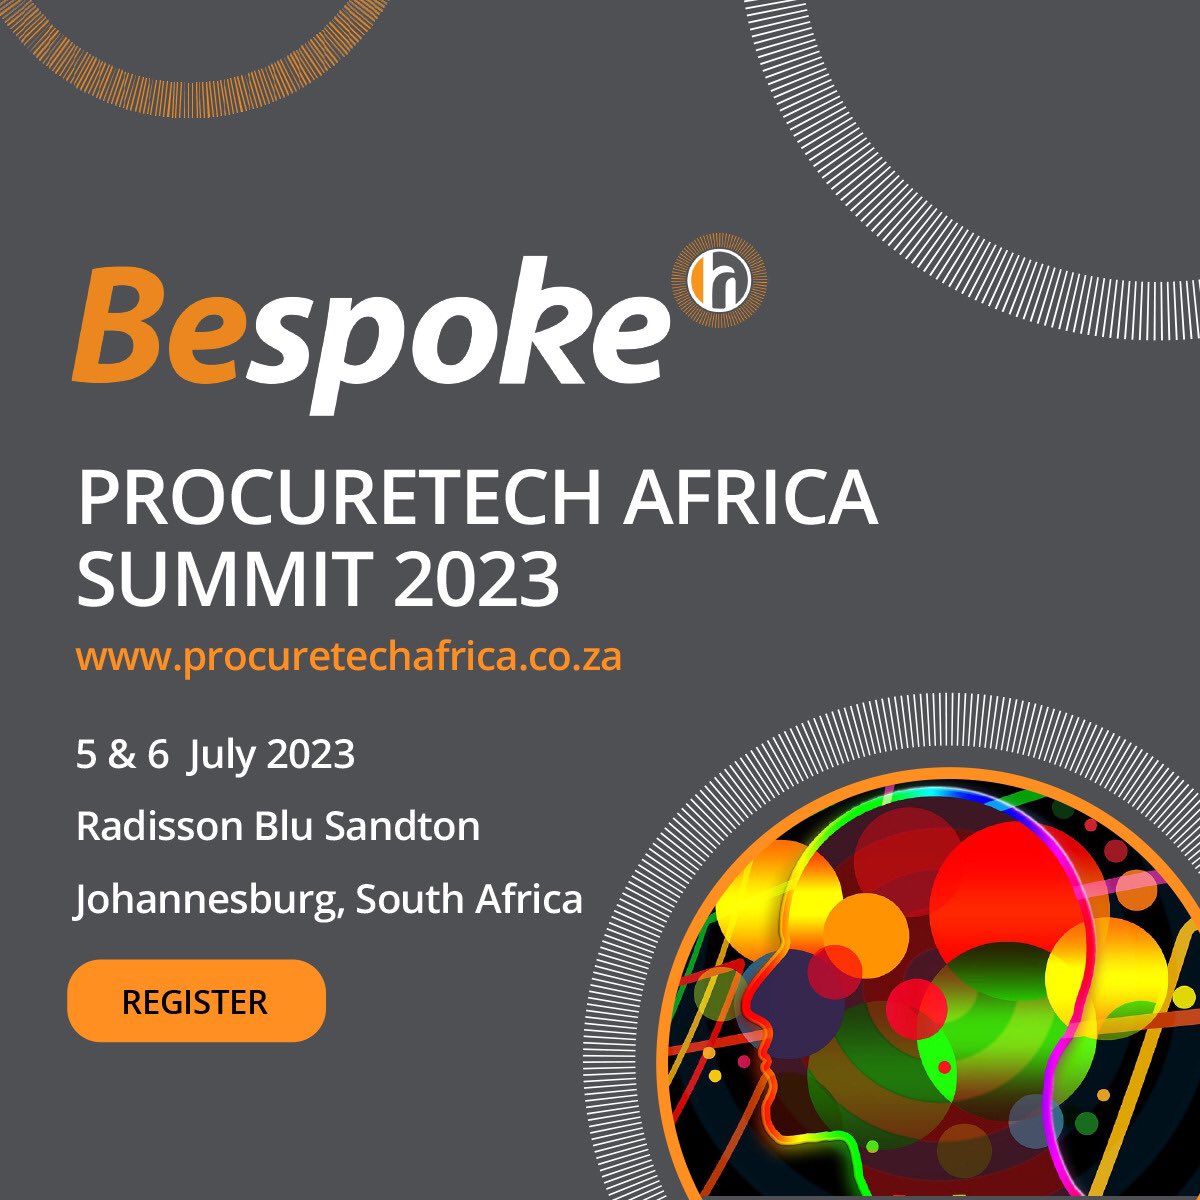 We are gearing up towards delivering the pre-eminent ProcureTech Africa Summit on 5 & 6 July in Sandton, South Africa.

Registrations close on 30 June 2023

#procurement #ai #traveltech #supplychain #digitization #sourcetopay #digitalsupplychain #blockchains #digitalprocurement